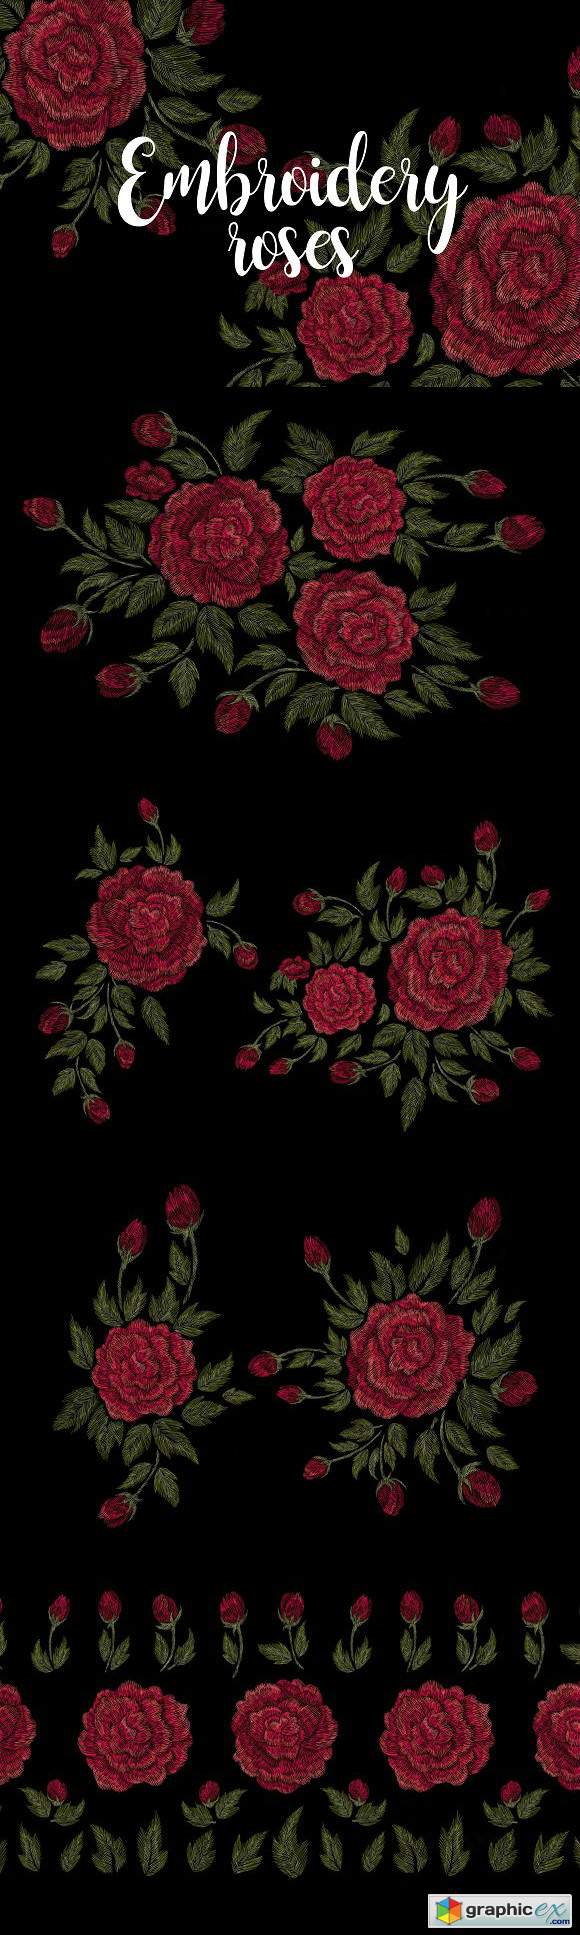 Embroidery roses